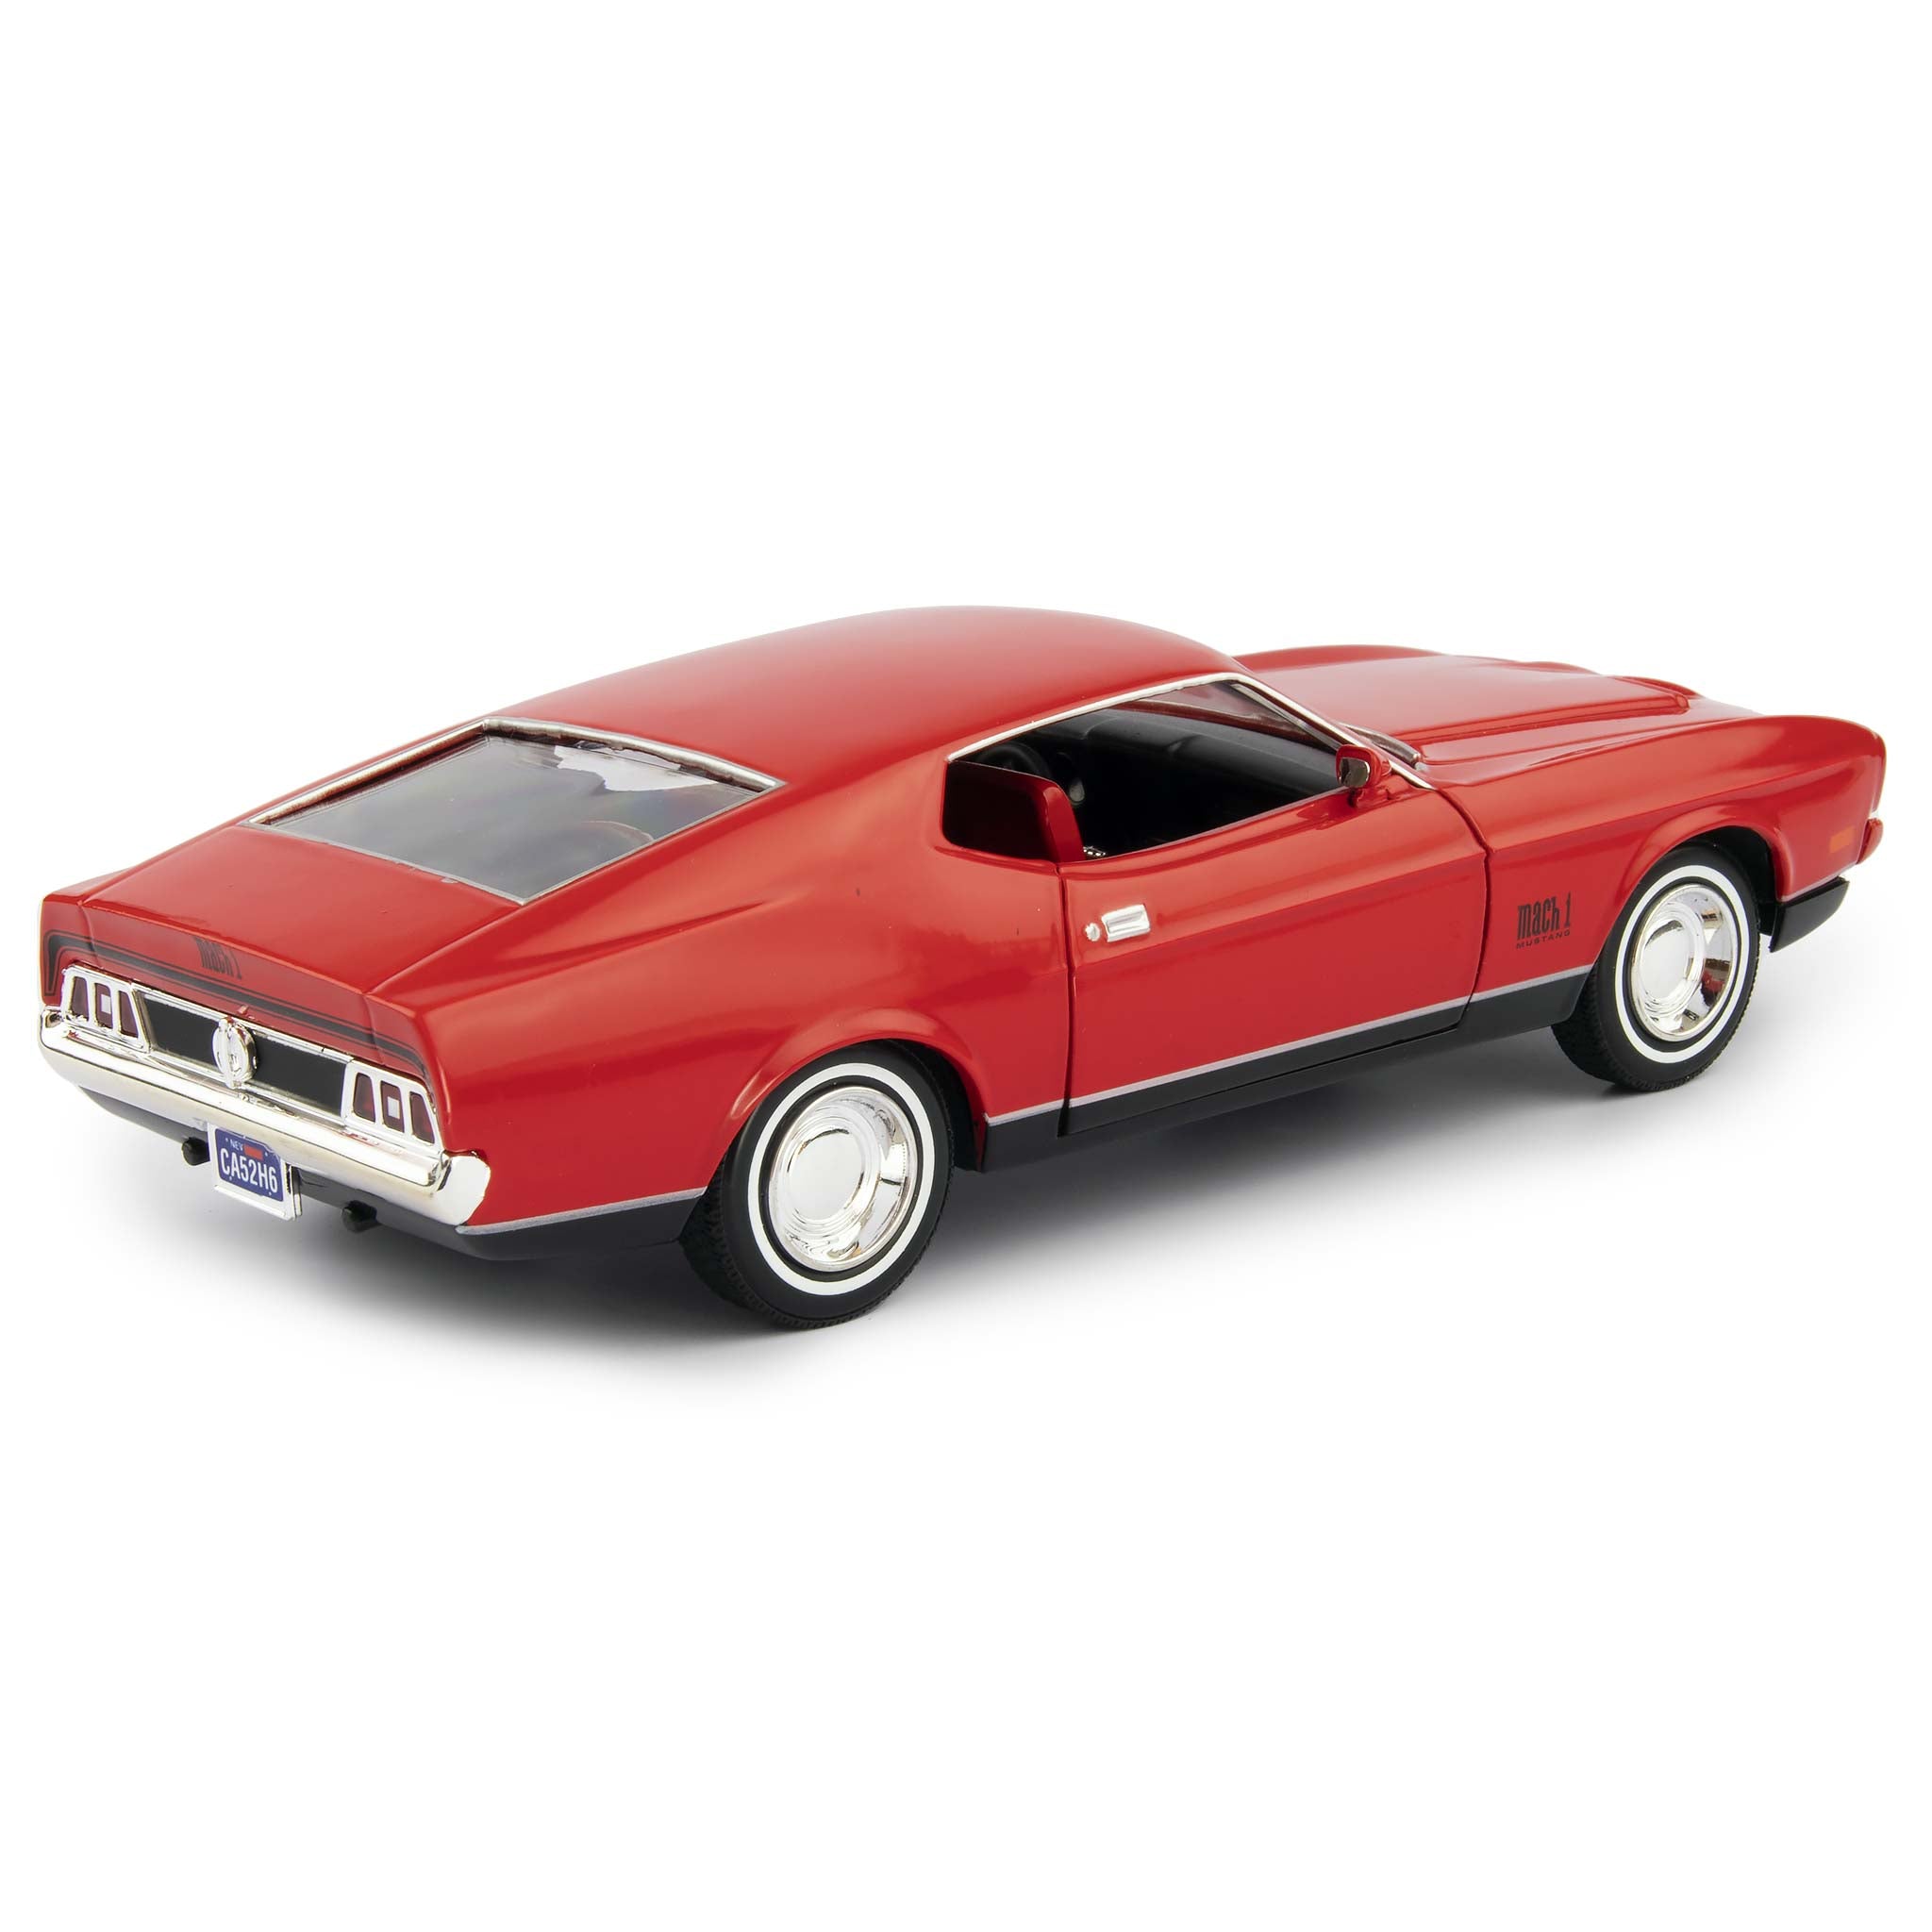 Ford Mustang Mach 1 James Bond Diamonds Are Forever - 1:24 Scale